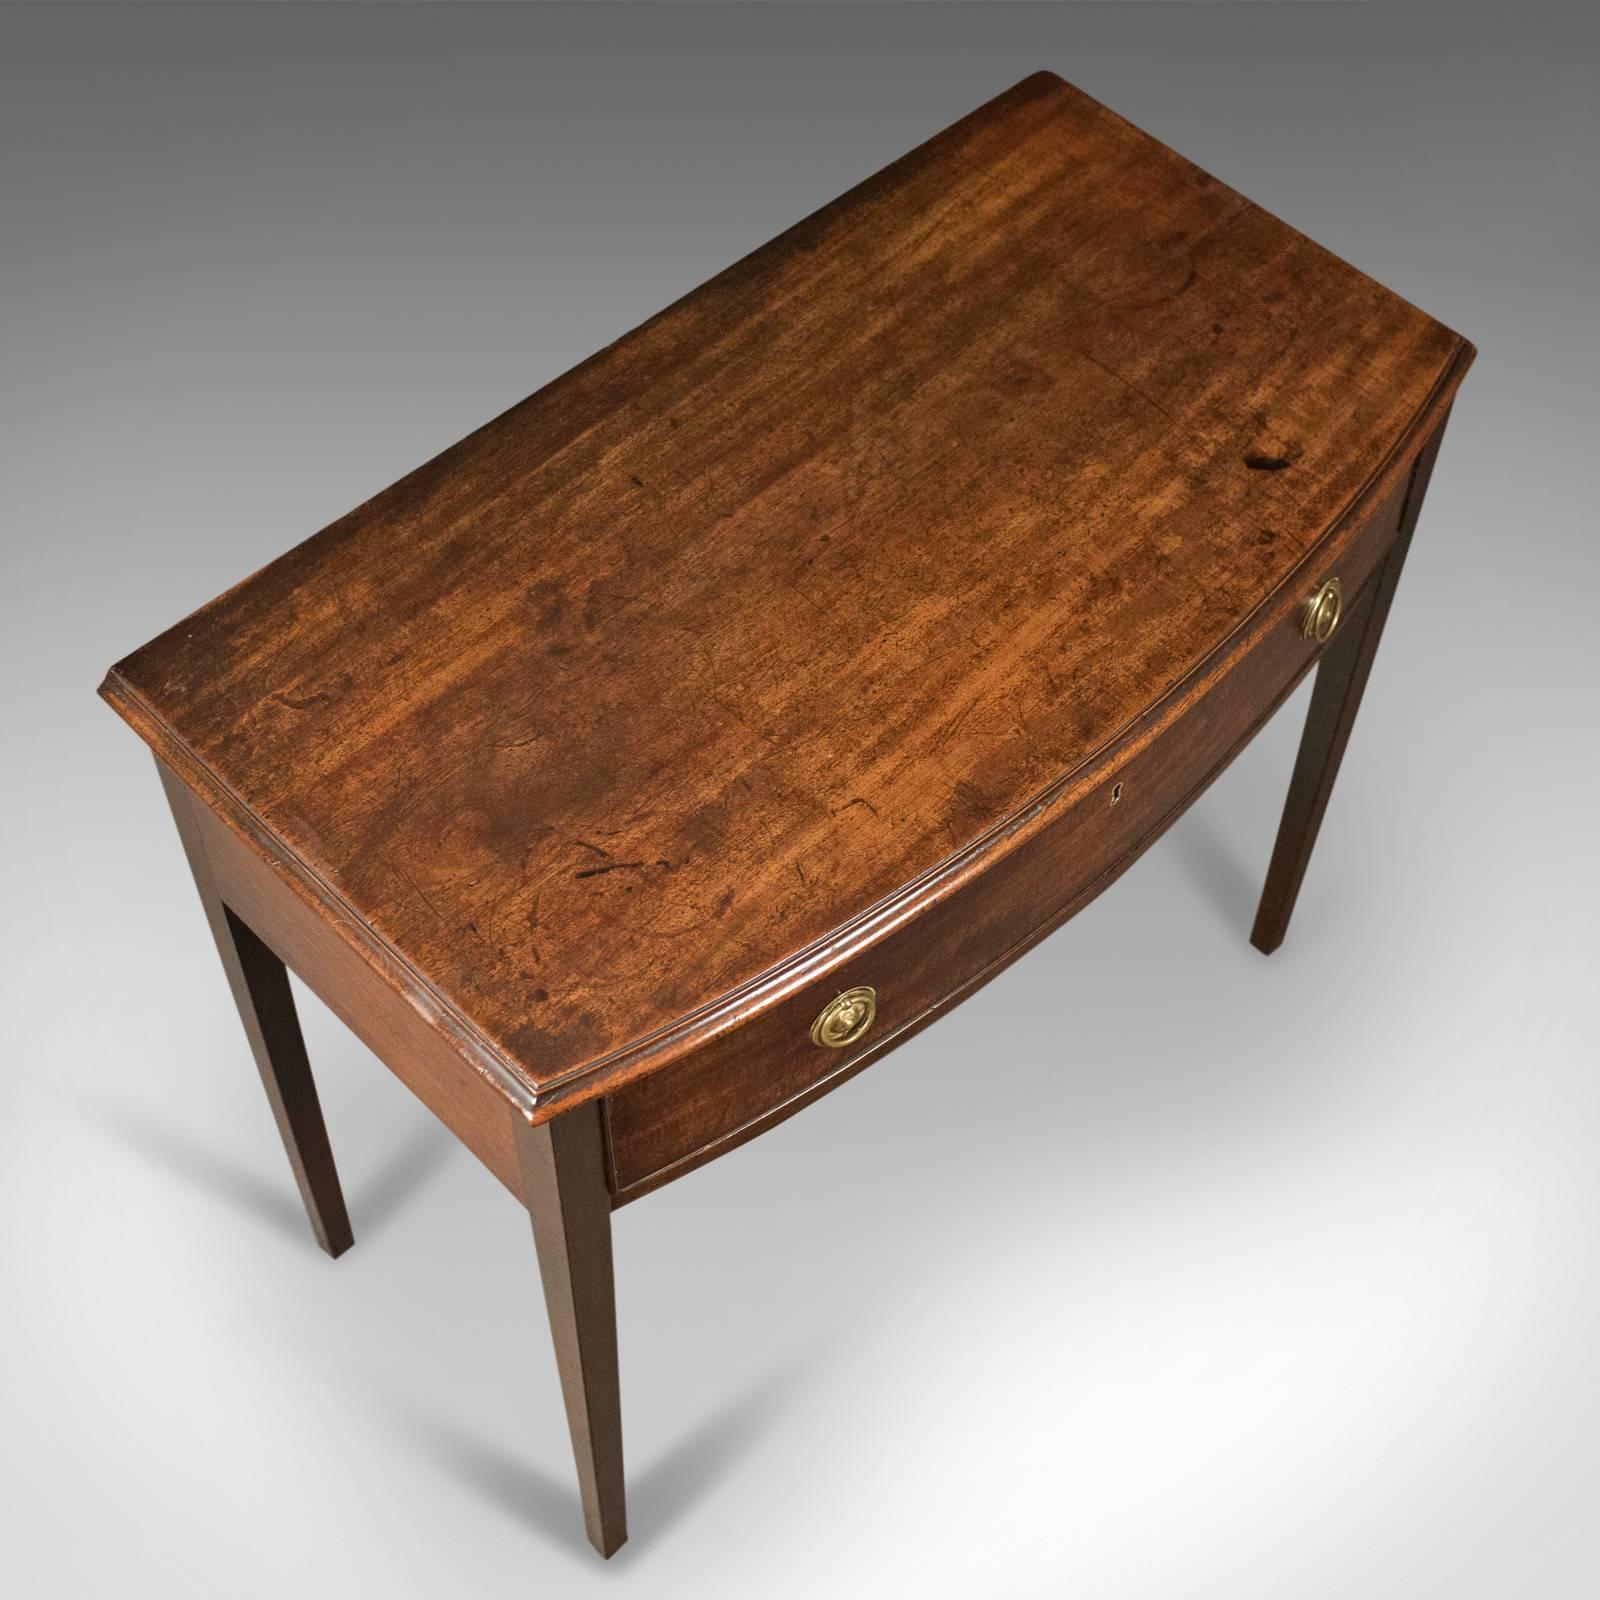 Great Britain (UK) Antique Side Table, Mahogany, Bow Fronted, English, George III, circa 1770